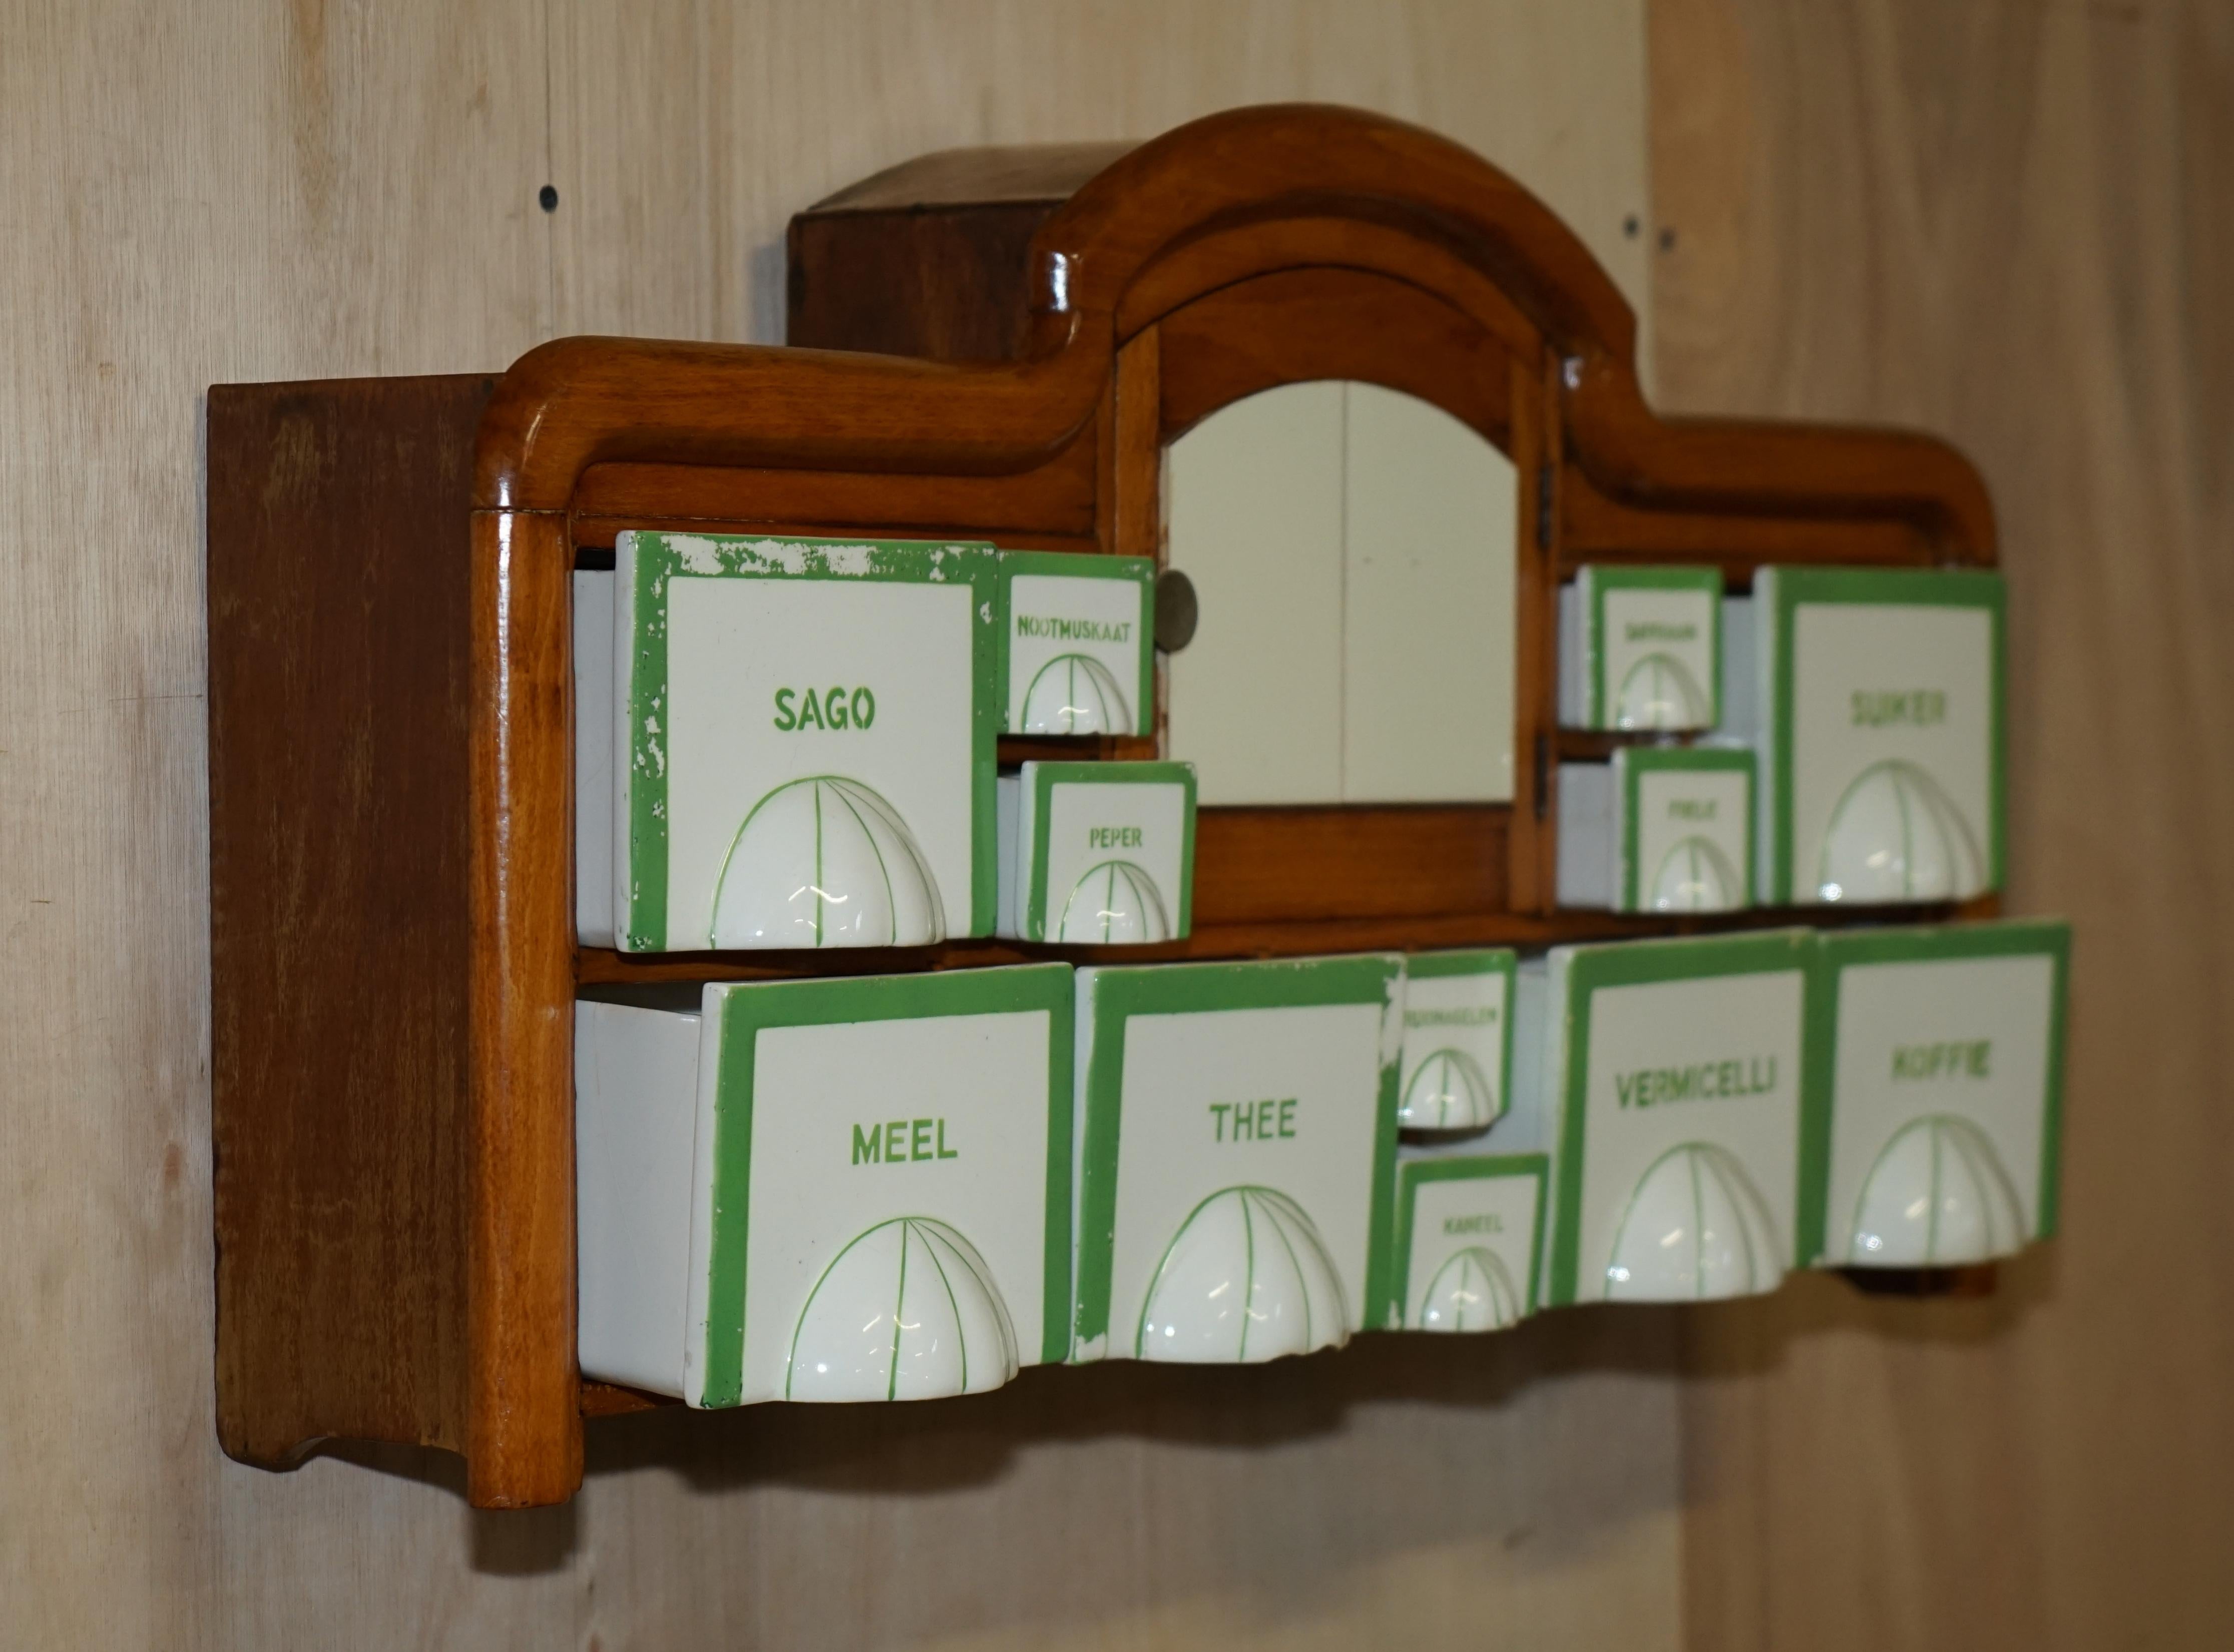 Petrus Regout & Co Maastricht Holland Art Deco Wall Mounted Kitchen Spice Rack For Sale 8